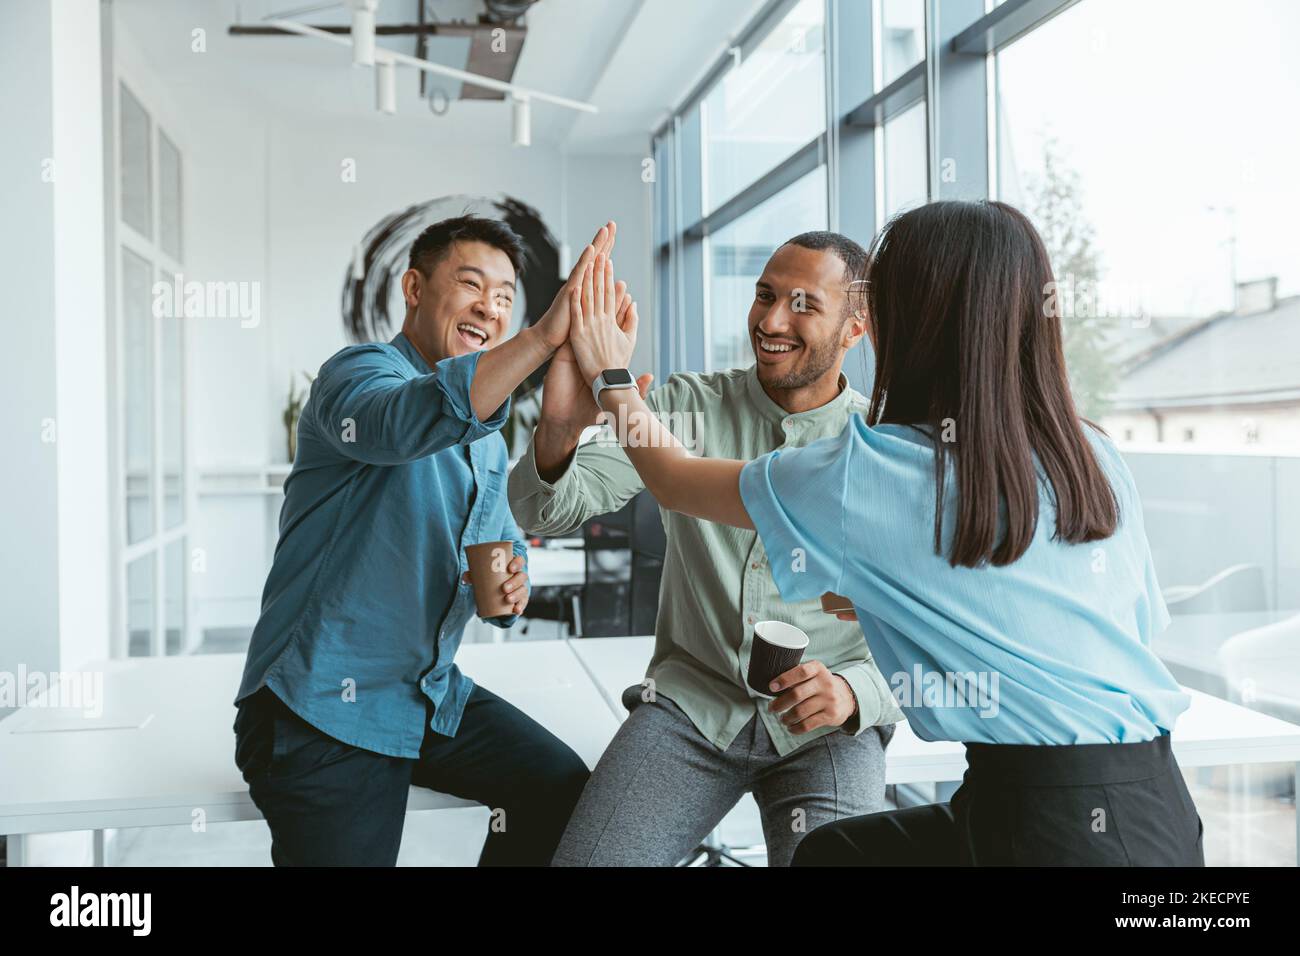 Smiling group of multiethnic colleagues drinking coffee and talking during break Stock Photo